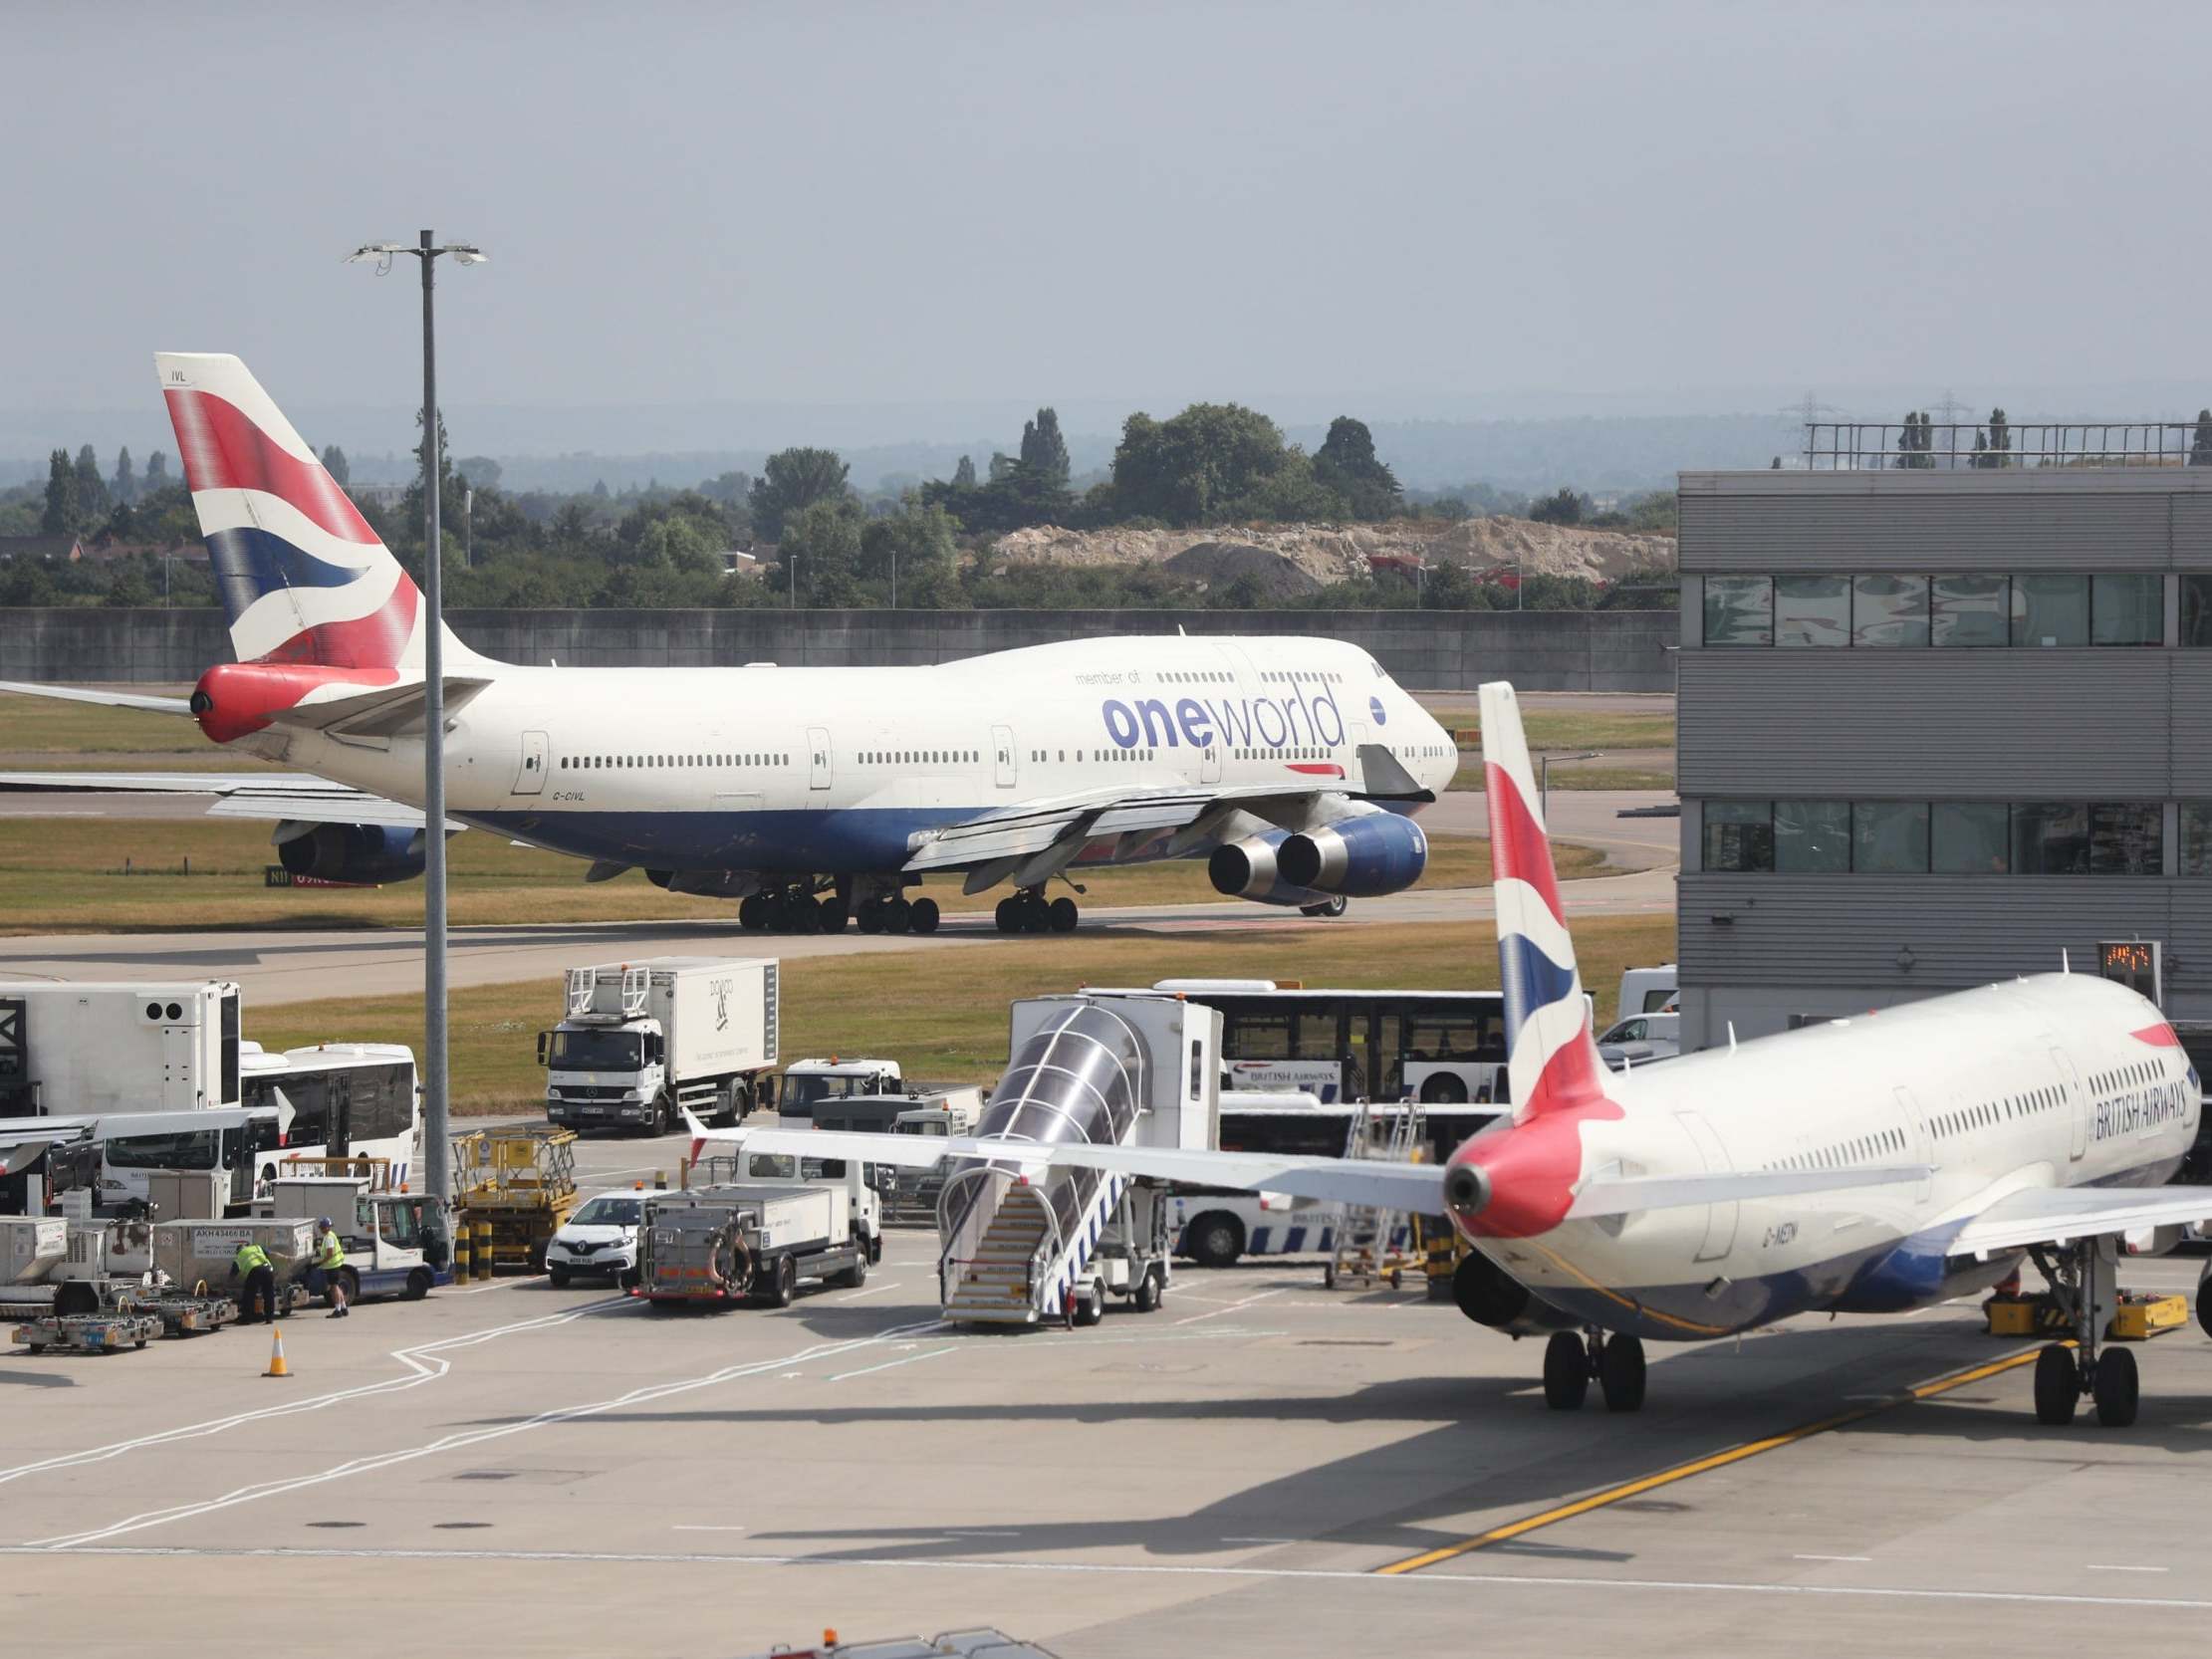 Heathrow strike: Everything you need to know about the planned industrial action